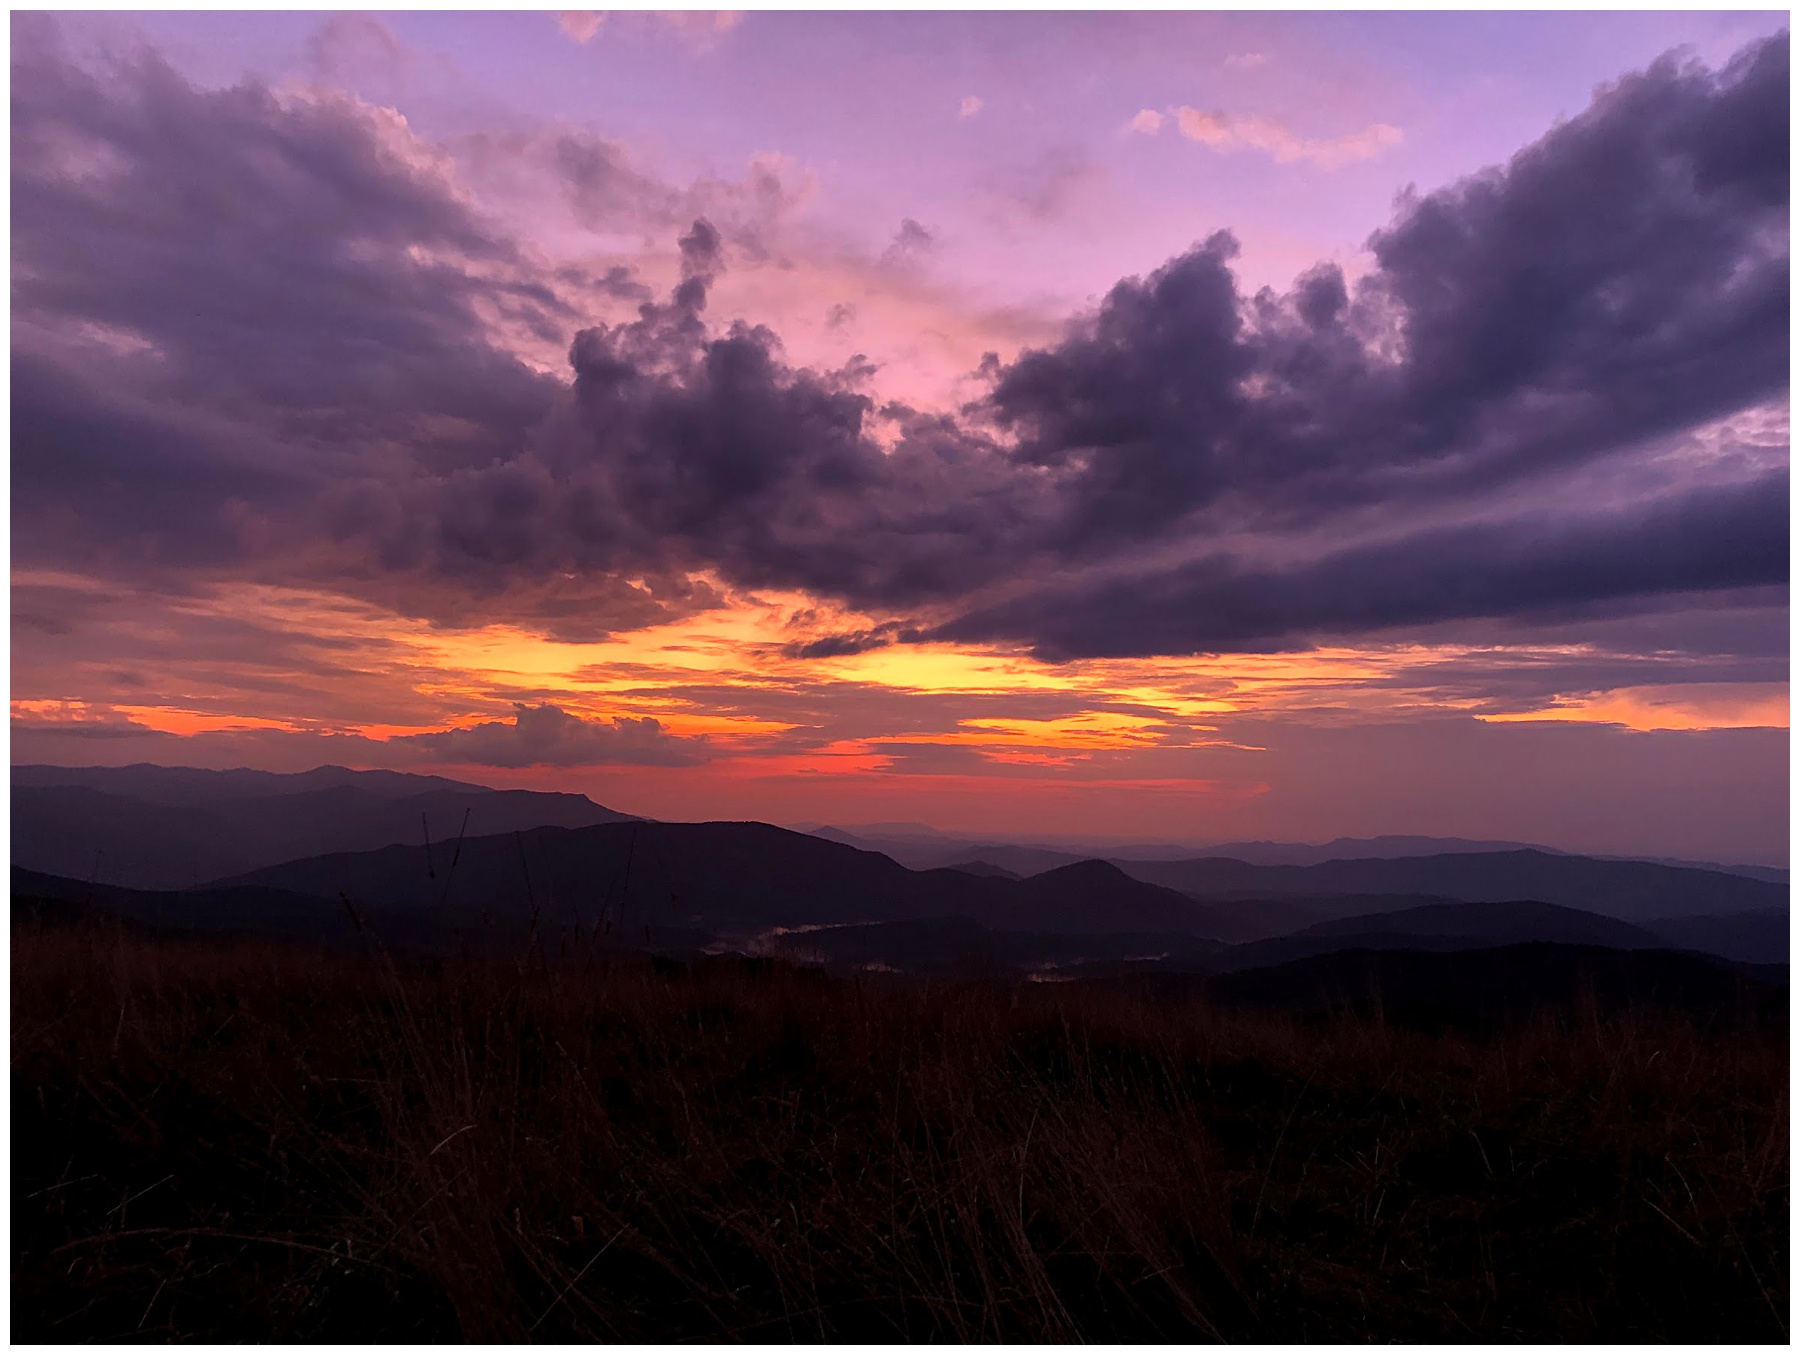 Sunset over Smoky Mountains from Max Patch